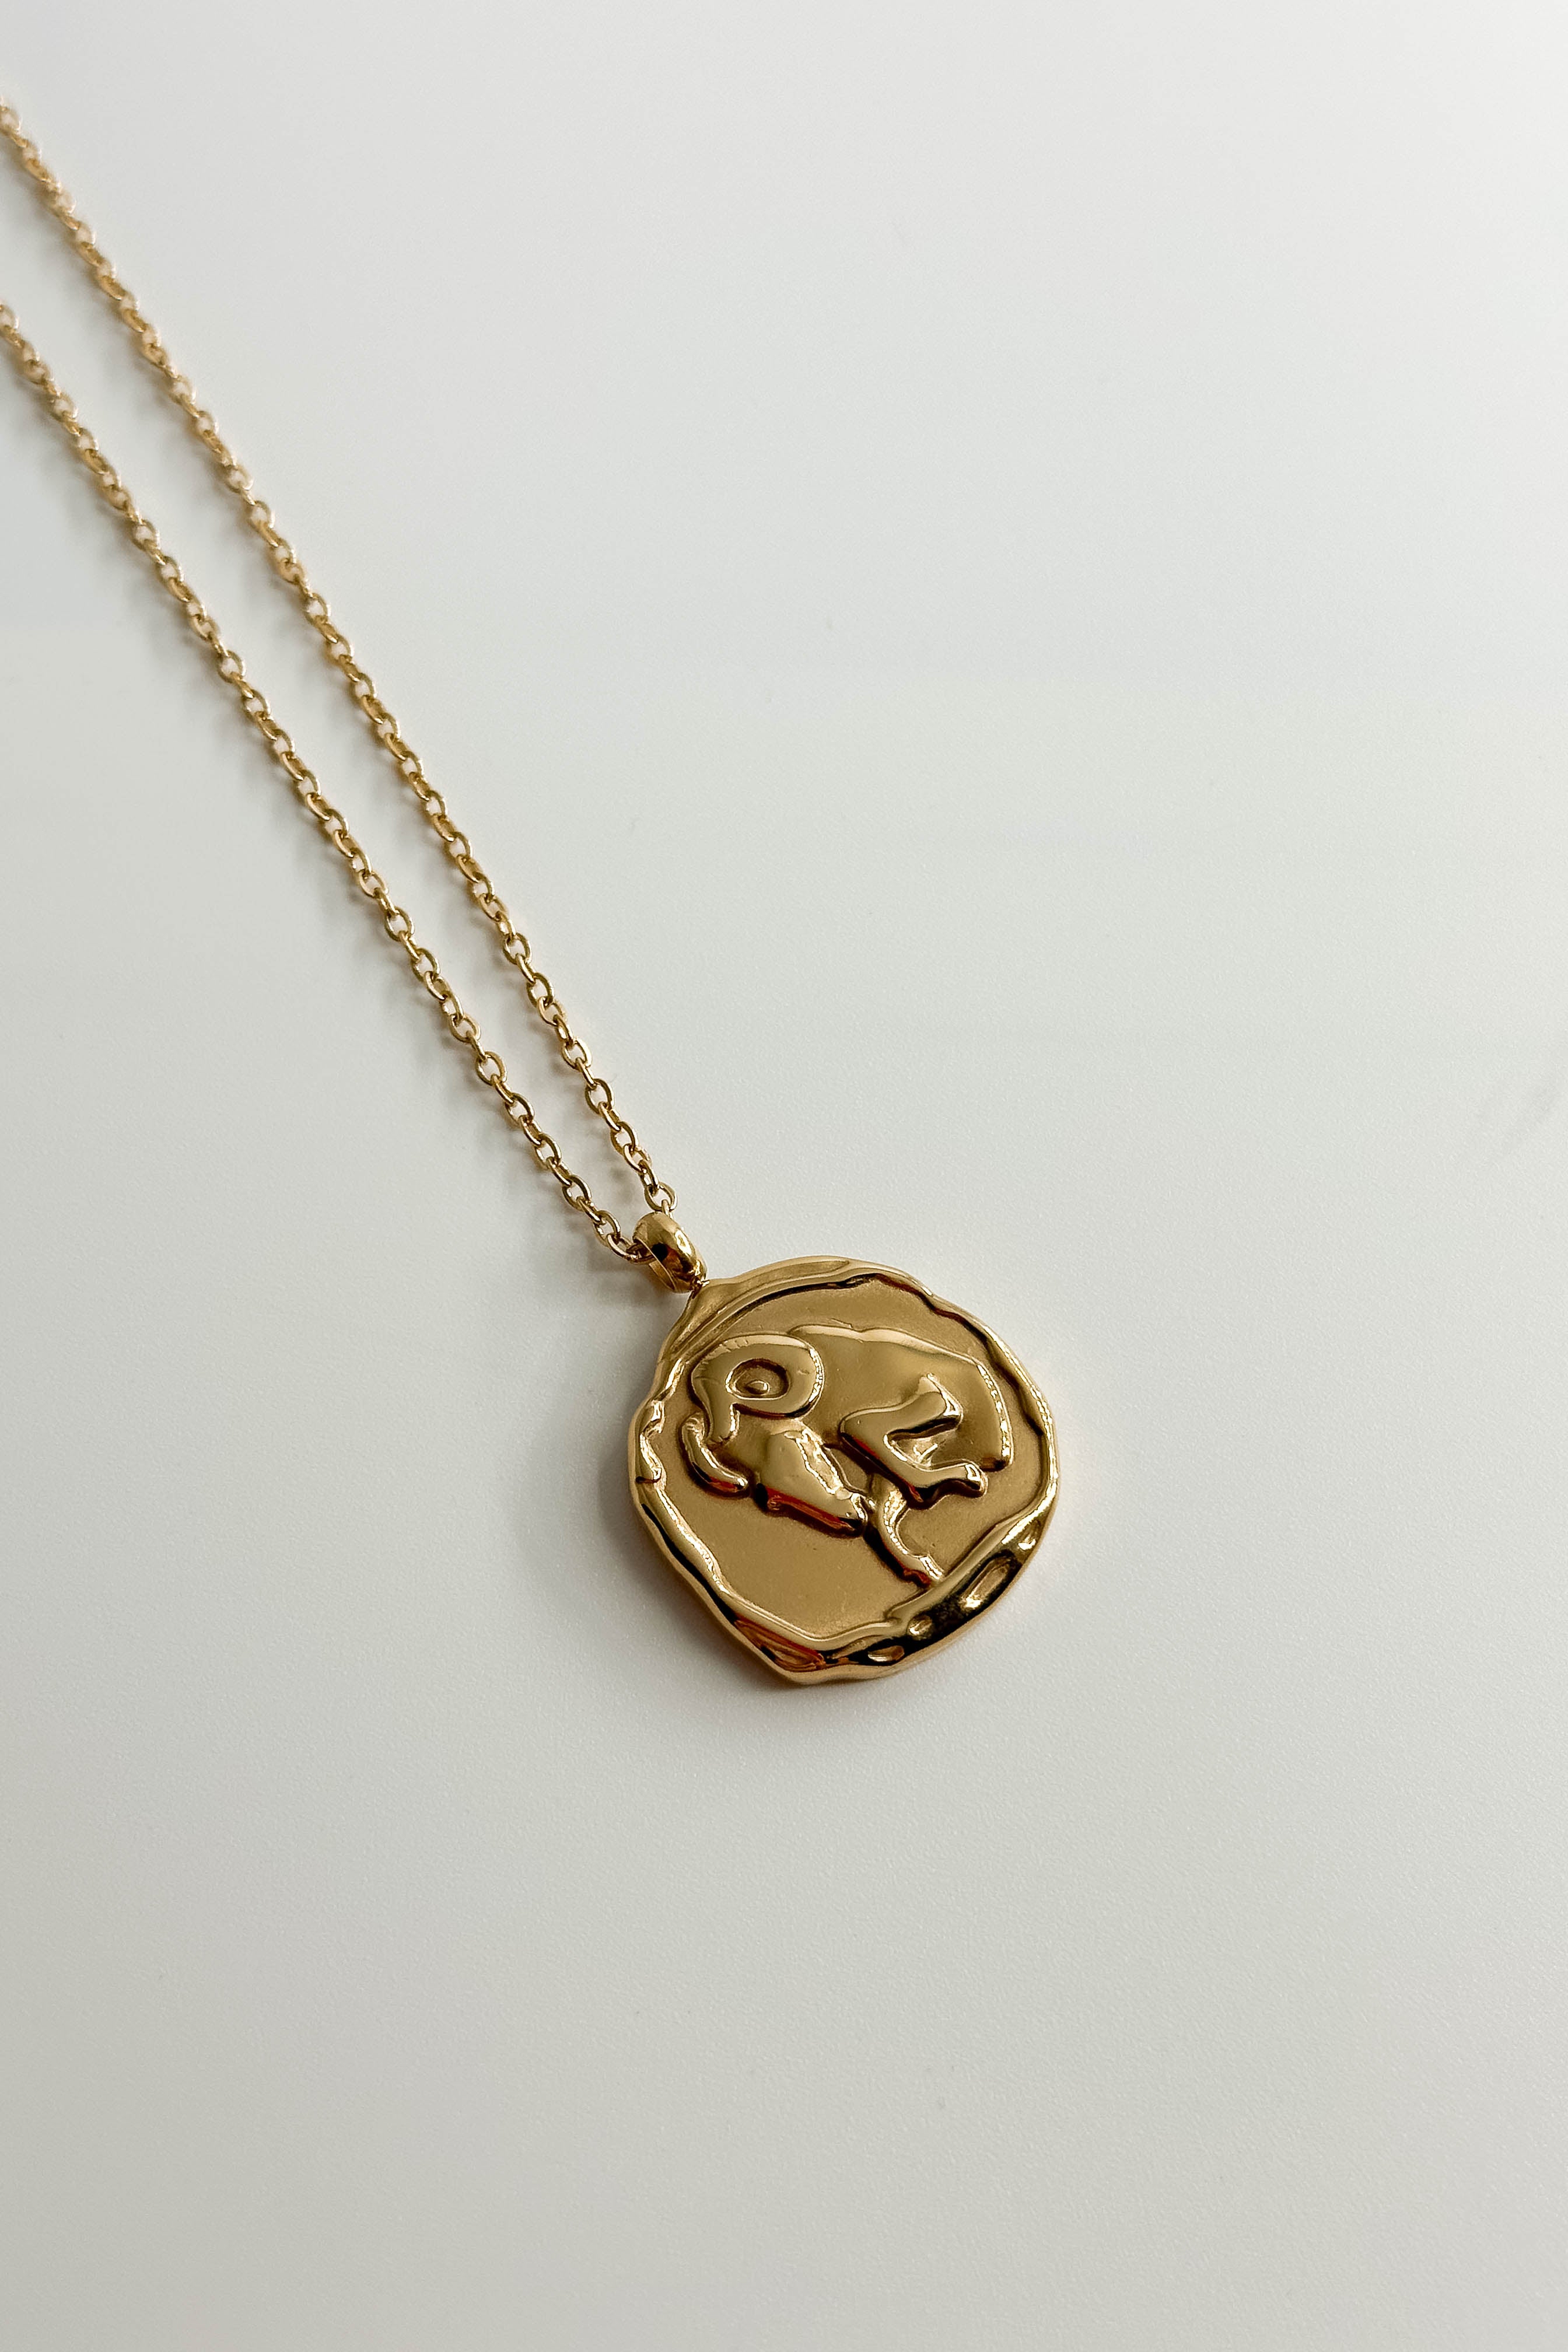 Image of the Aries Zodiac Gold Coin Necklace that has a ram on the coin. Shown against white background.